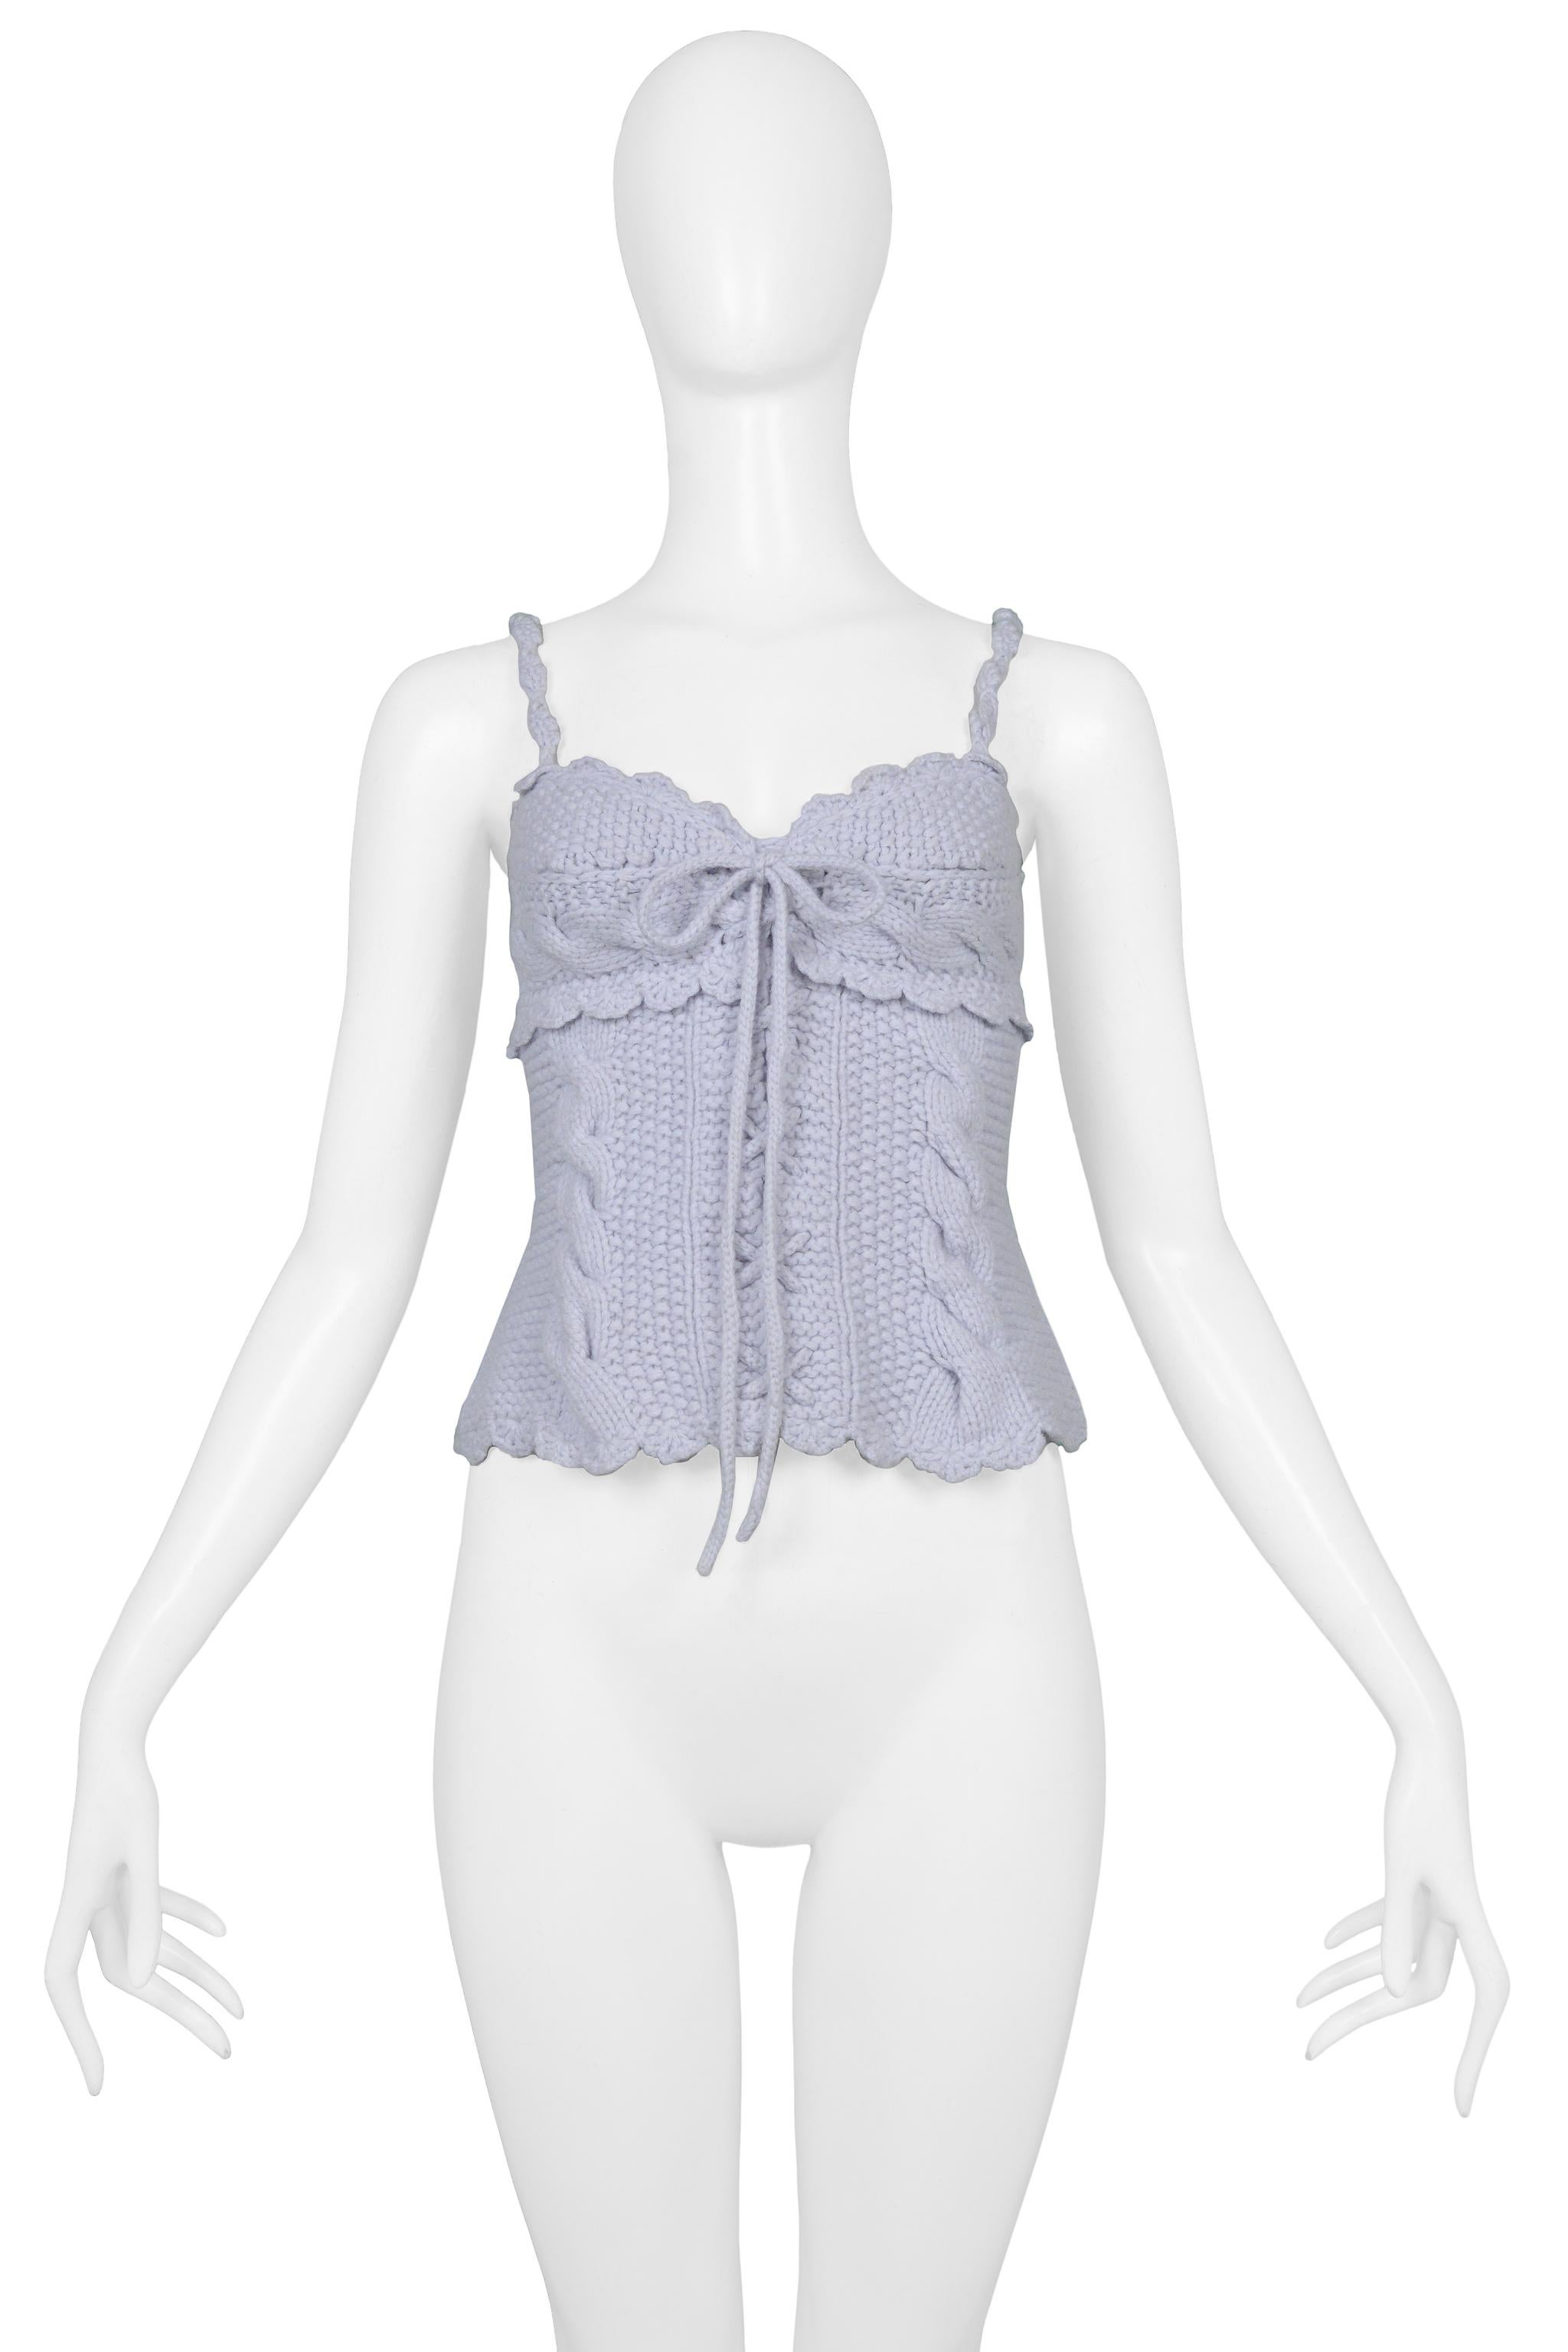 Resurrection Vintage is excited to offer a vintage Tao for Comme des Garcons light blue knitted corset top featuring cable knit panels, front criss-cross laces with tie, knitted straps, and scalloped edges. From the 2005 collection. 

Tao For Comme